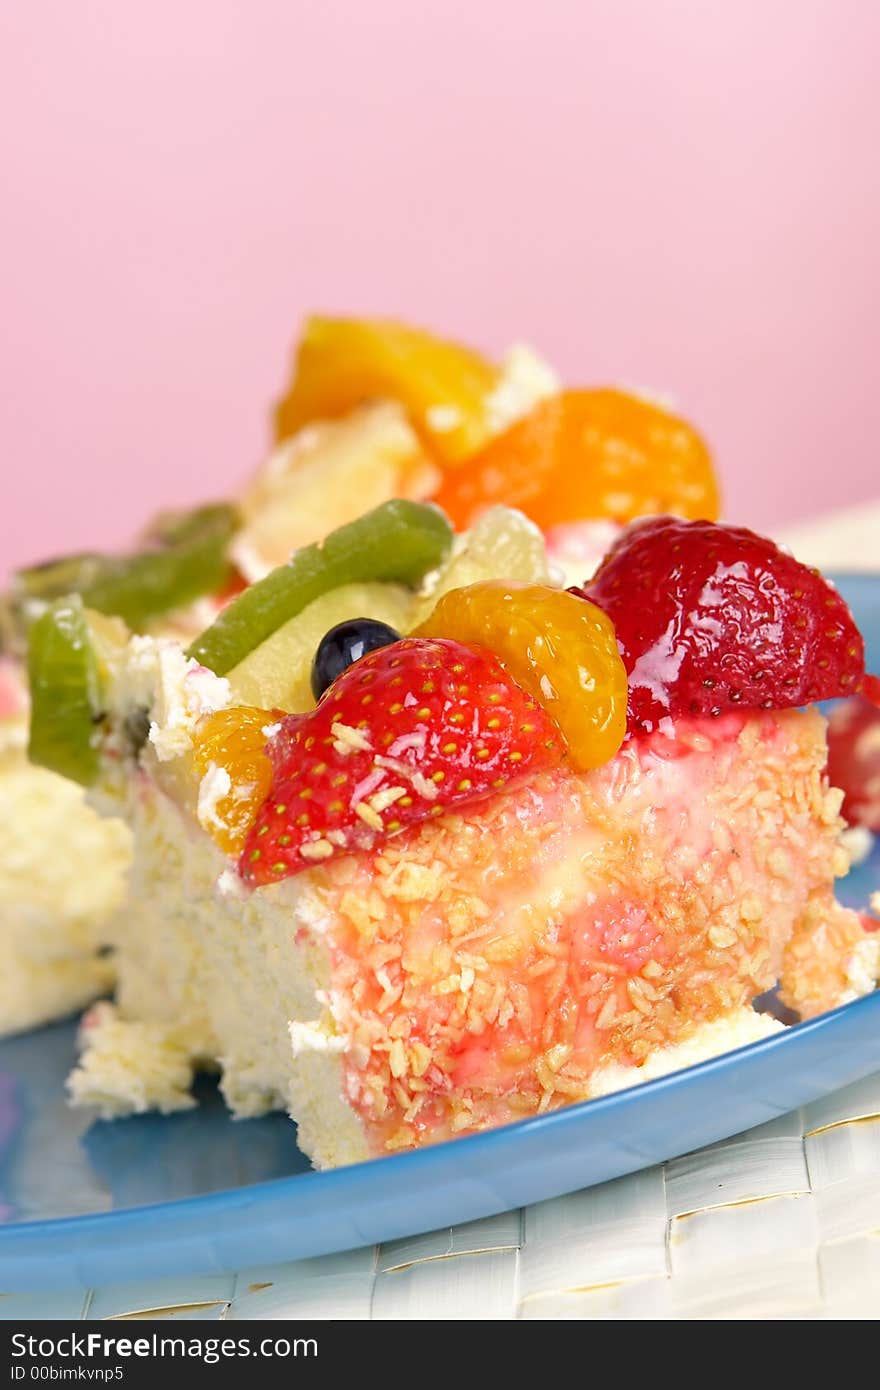 Two slices of fruit cheesecake. Two slices of fruit cheesecake